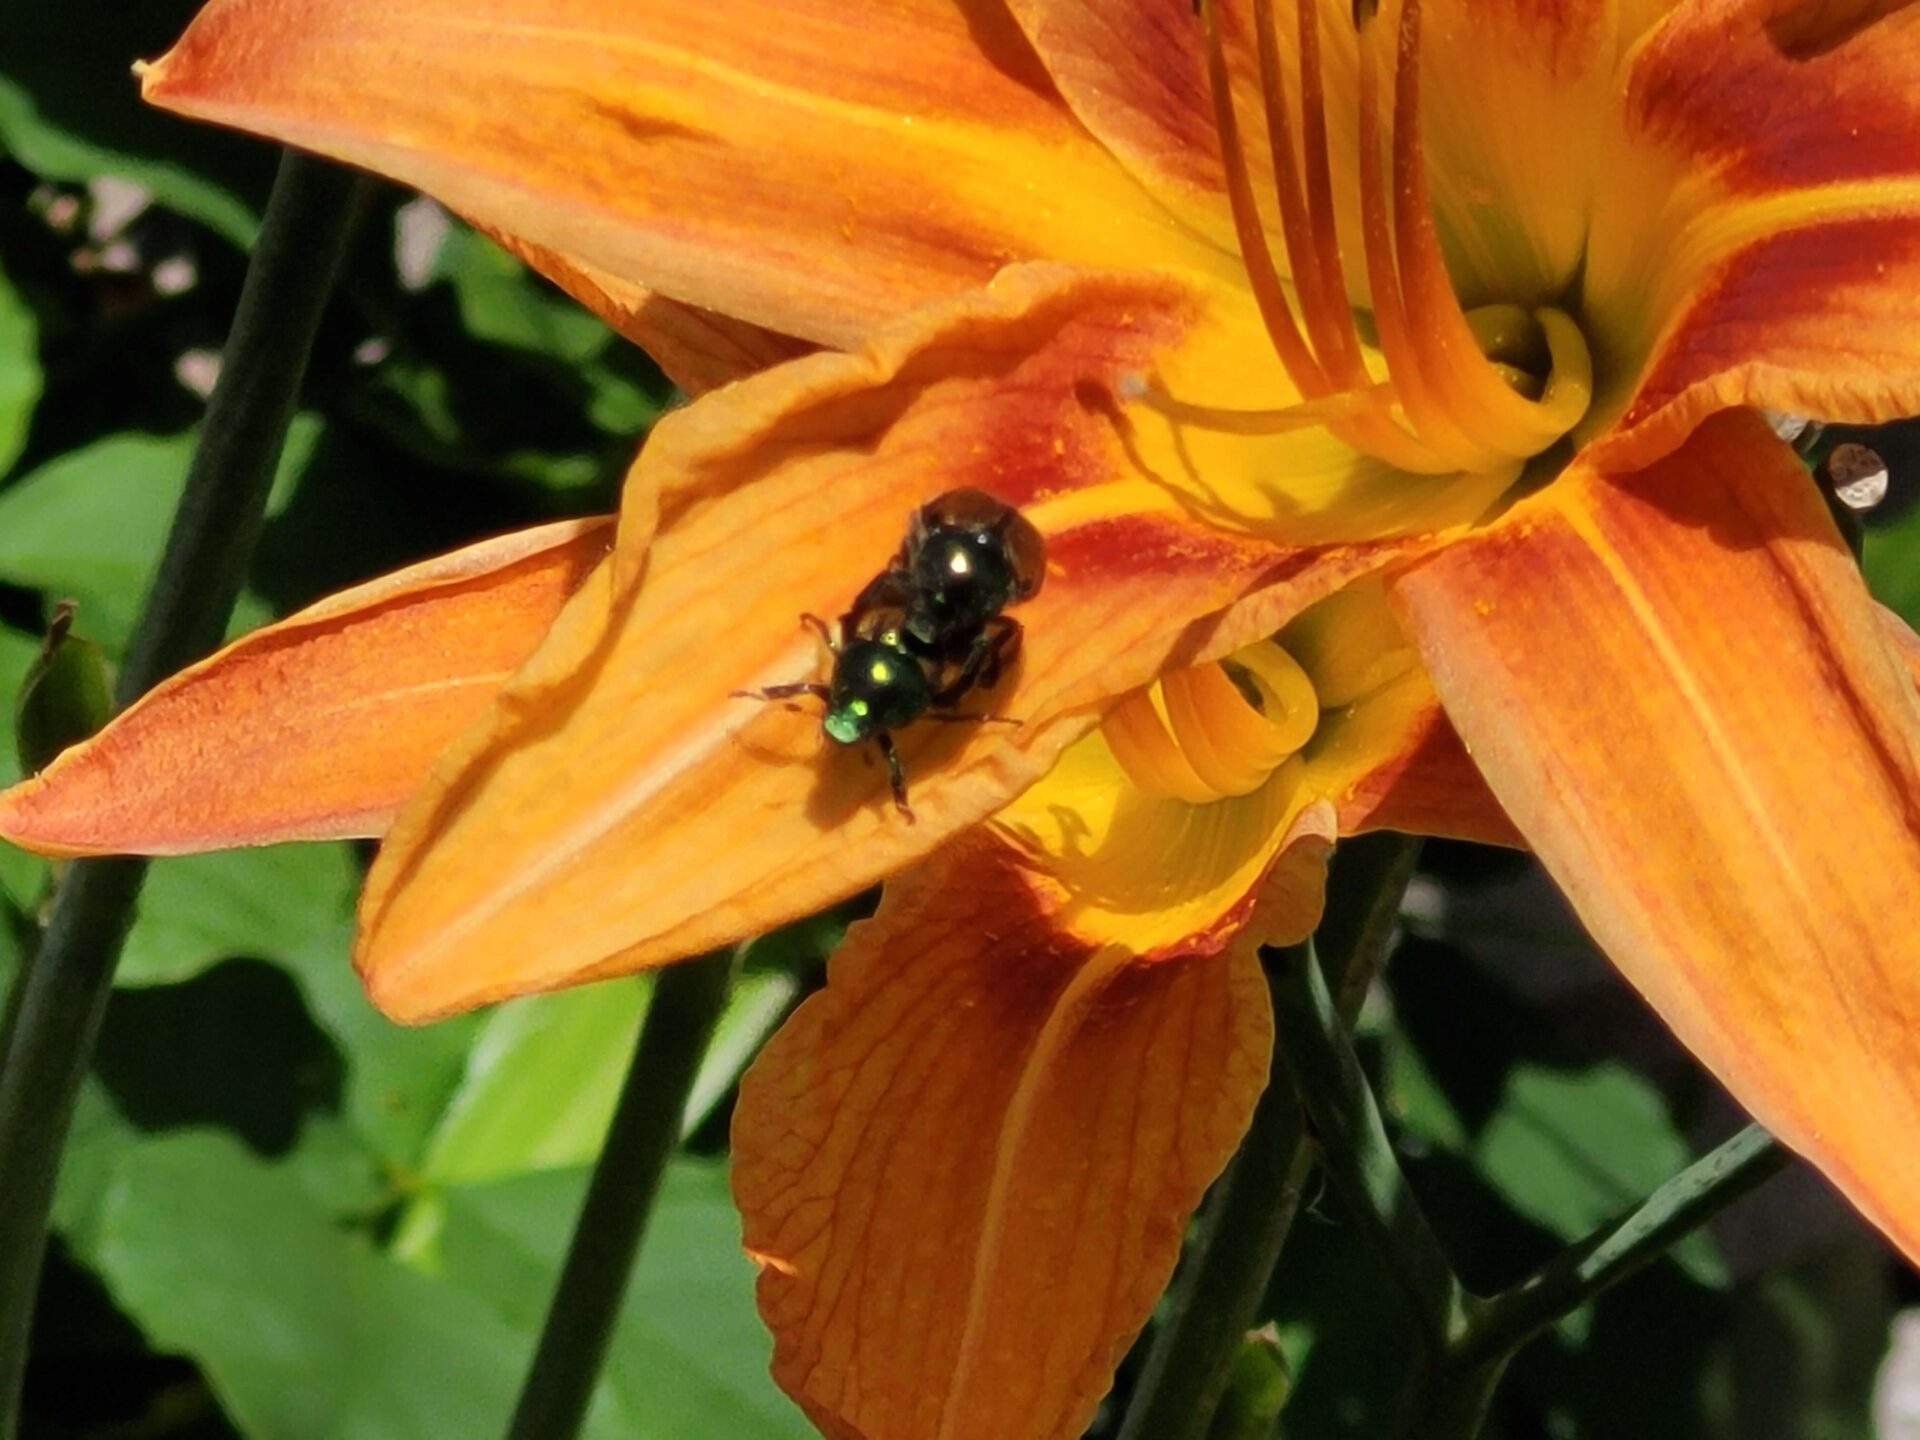 A close up image of a bug on a flower as an example of photography number 32 in the list of backyard business ideas.